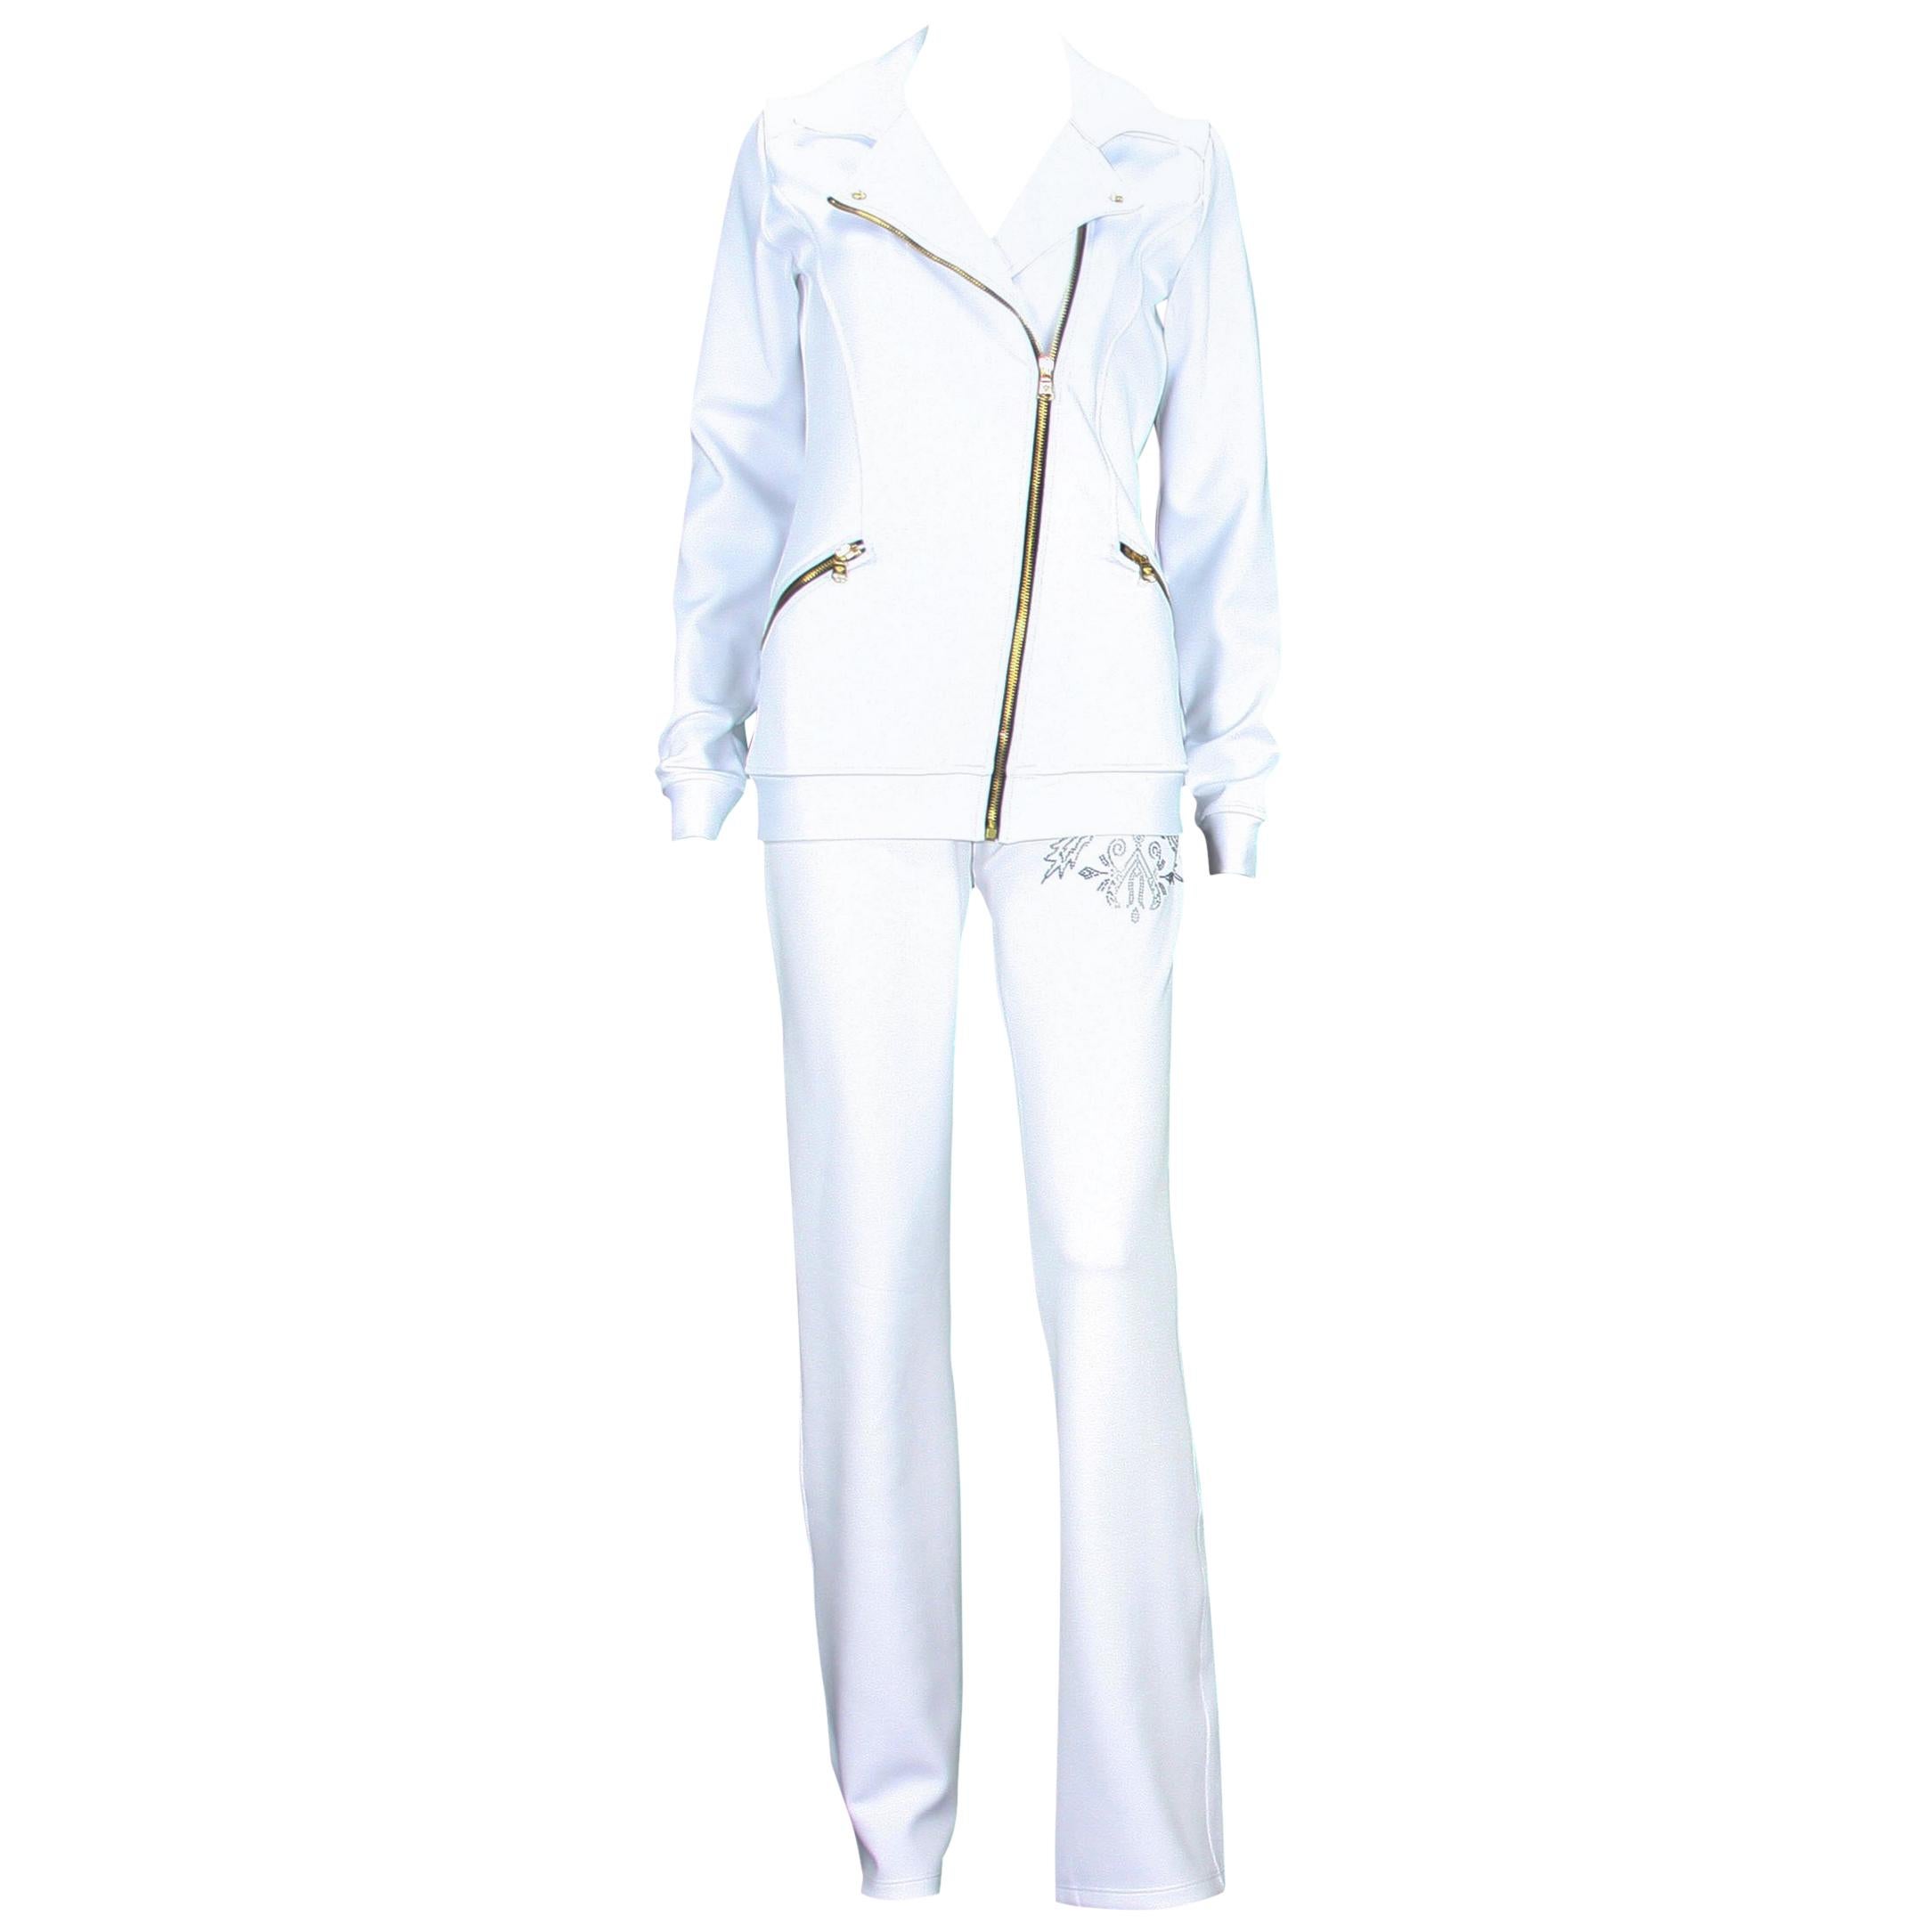 New Versace Women's White Gym Pant Suit with Crystal Embellishment  US 6 and 8 For Sale